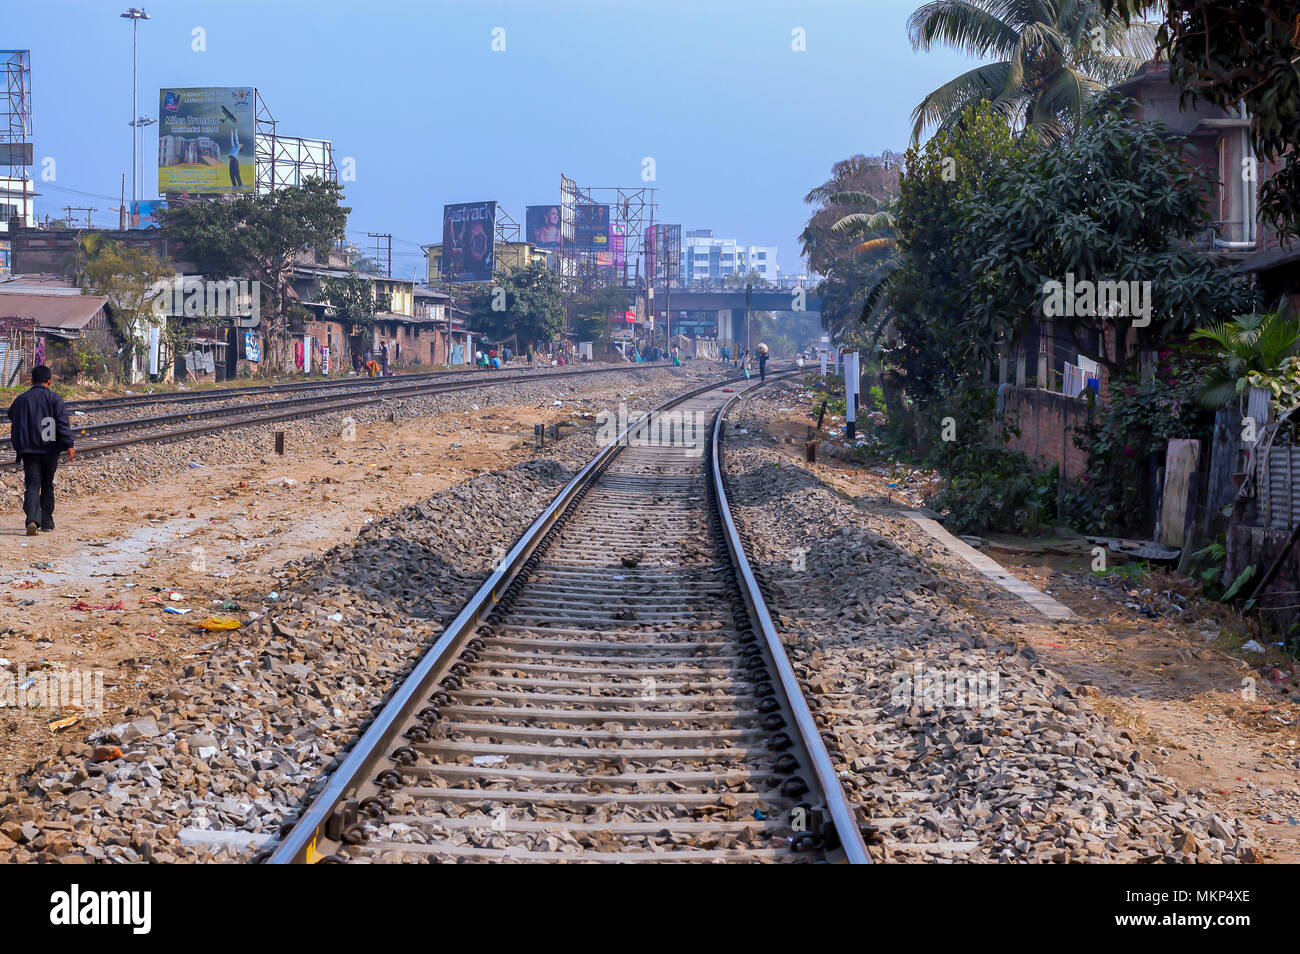 People walking nonchalantly on the sleepers of a railway tracks, in India. Residential houses and commercial establishments abuts the tracks. Stock Photo